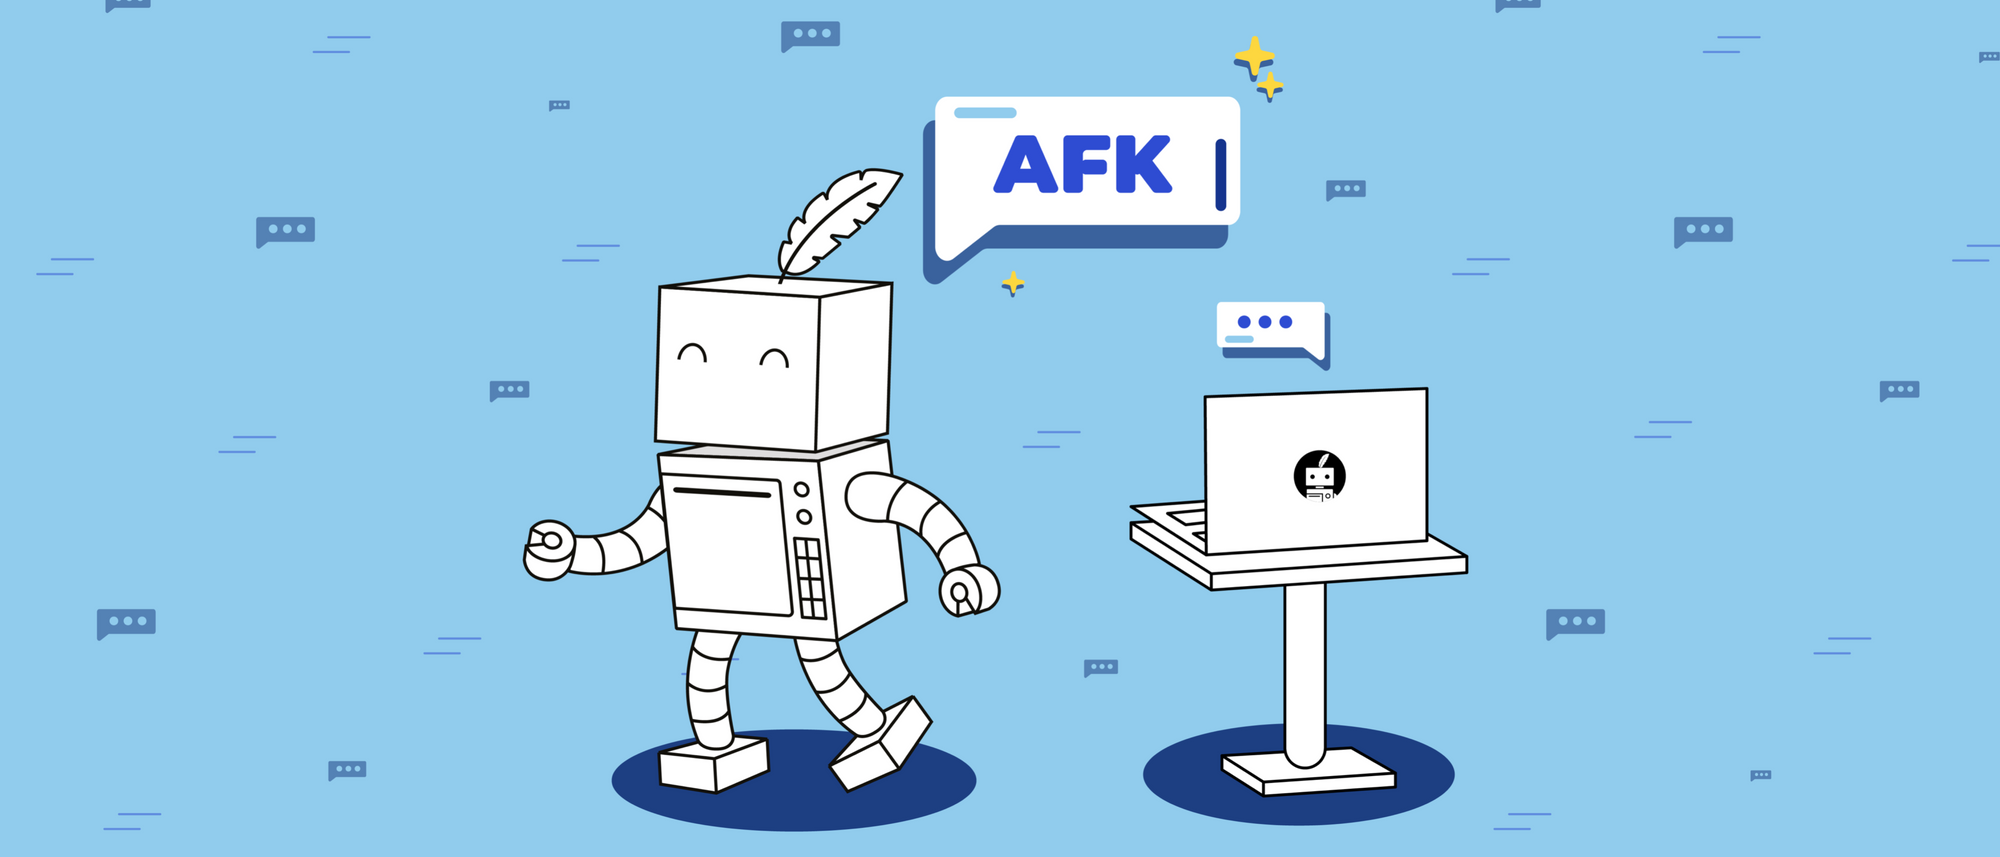 What Is AFK's Meaning? the Internet Acronym, Explained